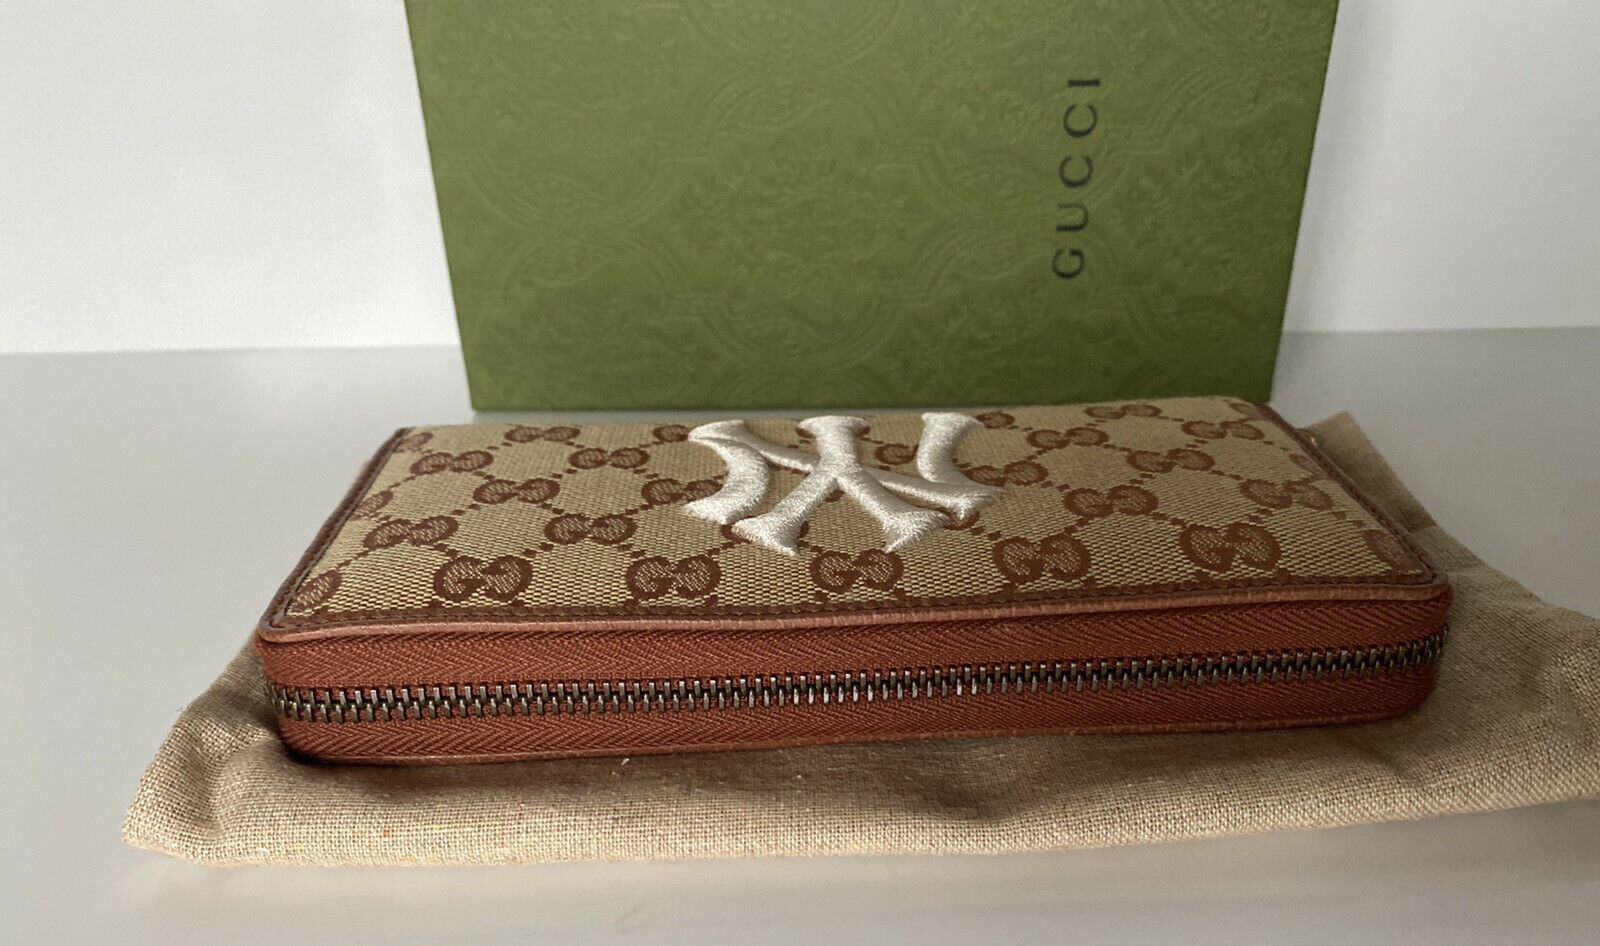 New Gucci GG NY Yankees Zip Around Fabric Wallet Beige Made in Italy